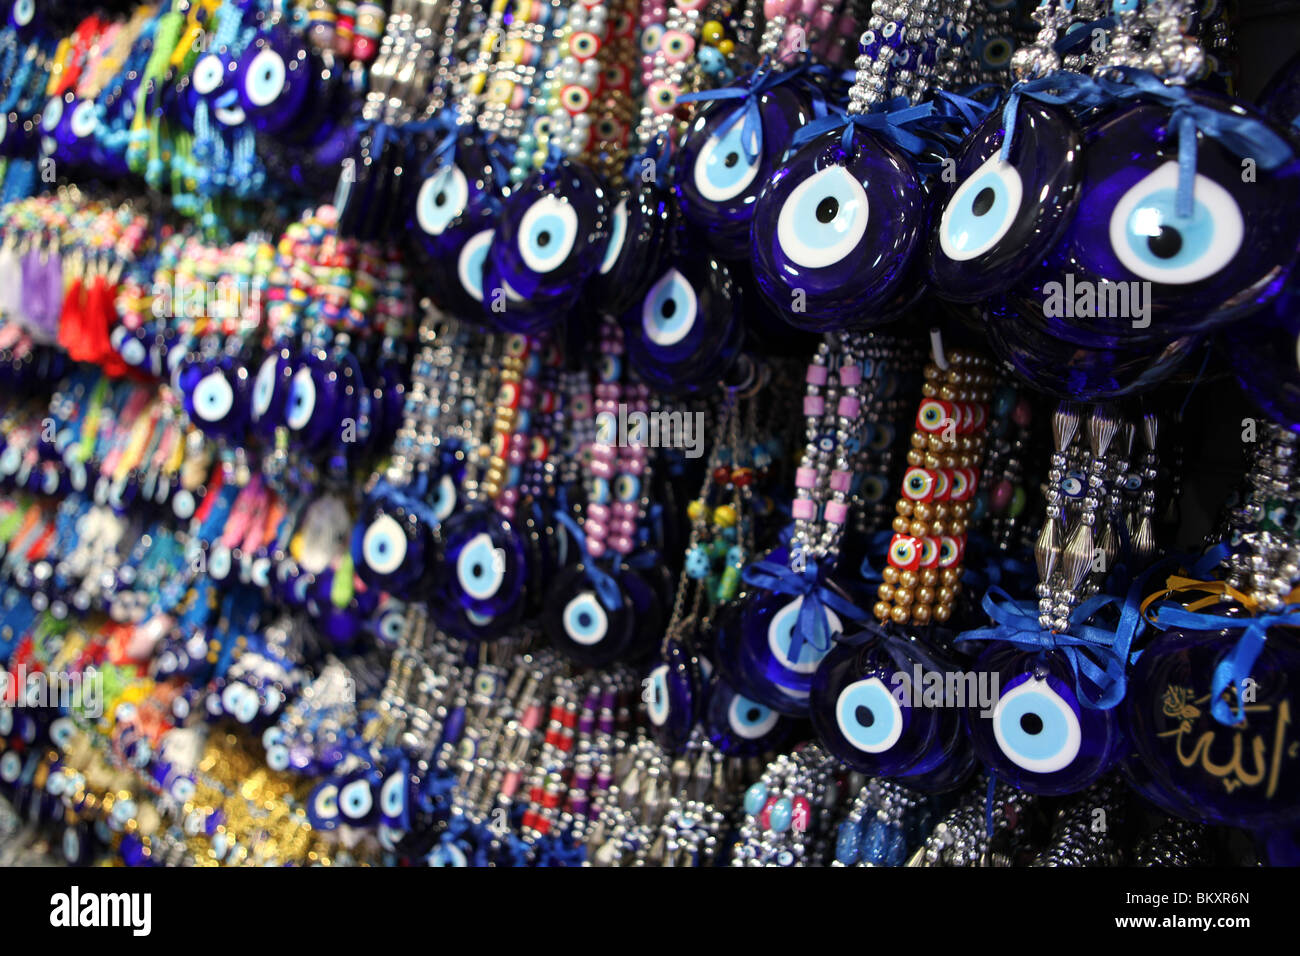 A shop full of nazars or evil eye stones that are believed to protect against the evil eye in Istanbul, Turkey in Europe Stock Photo